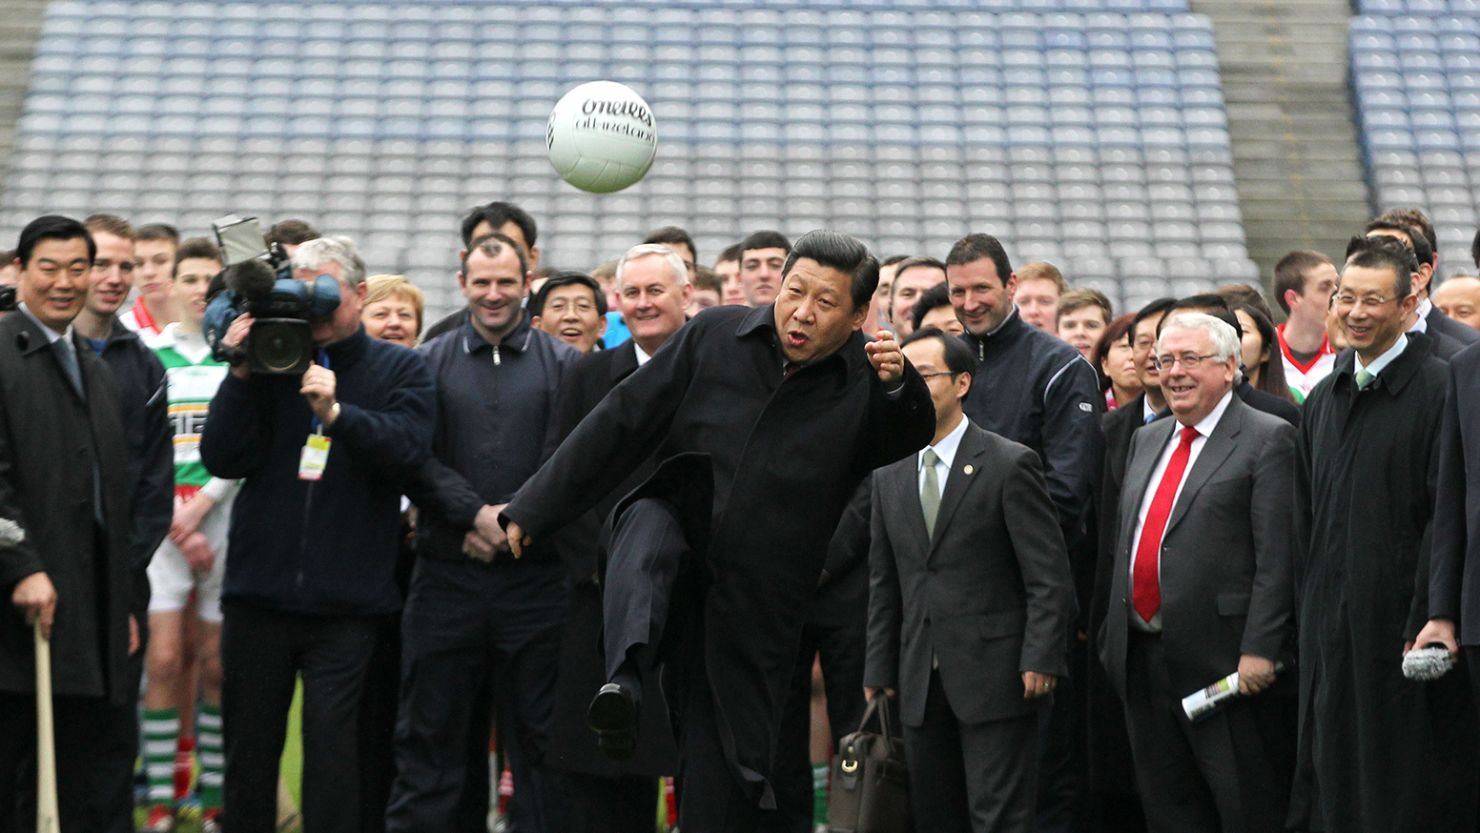 Chinese leader Xi Jinping visits Croke Park in Dublin, Ireland, in 2012.